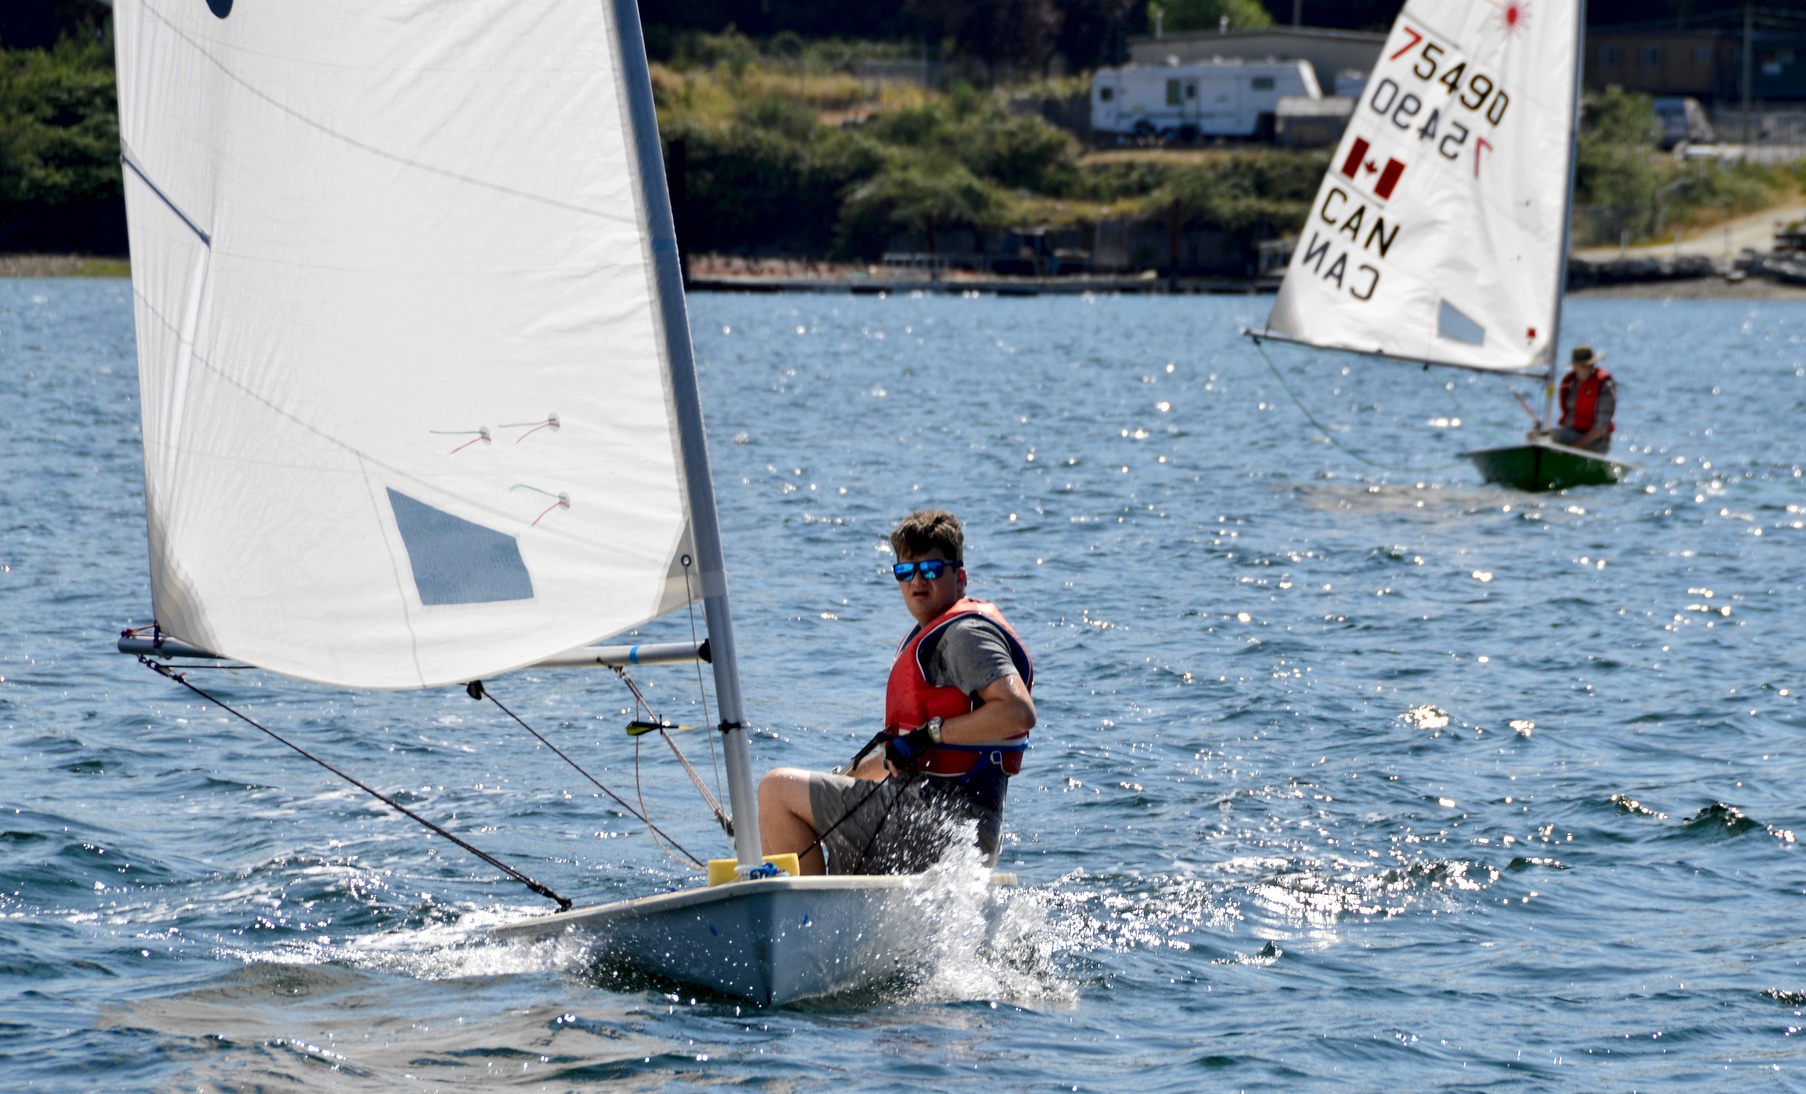 Robert Dall and Errol sailing his laser on the 6th Annual Poise Cove Regatta July 16th, 2017